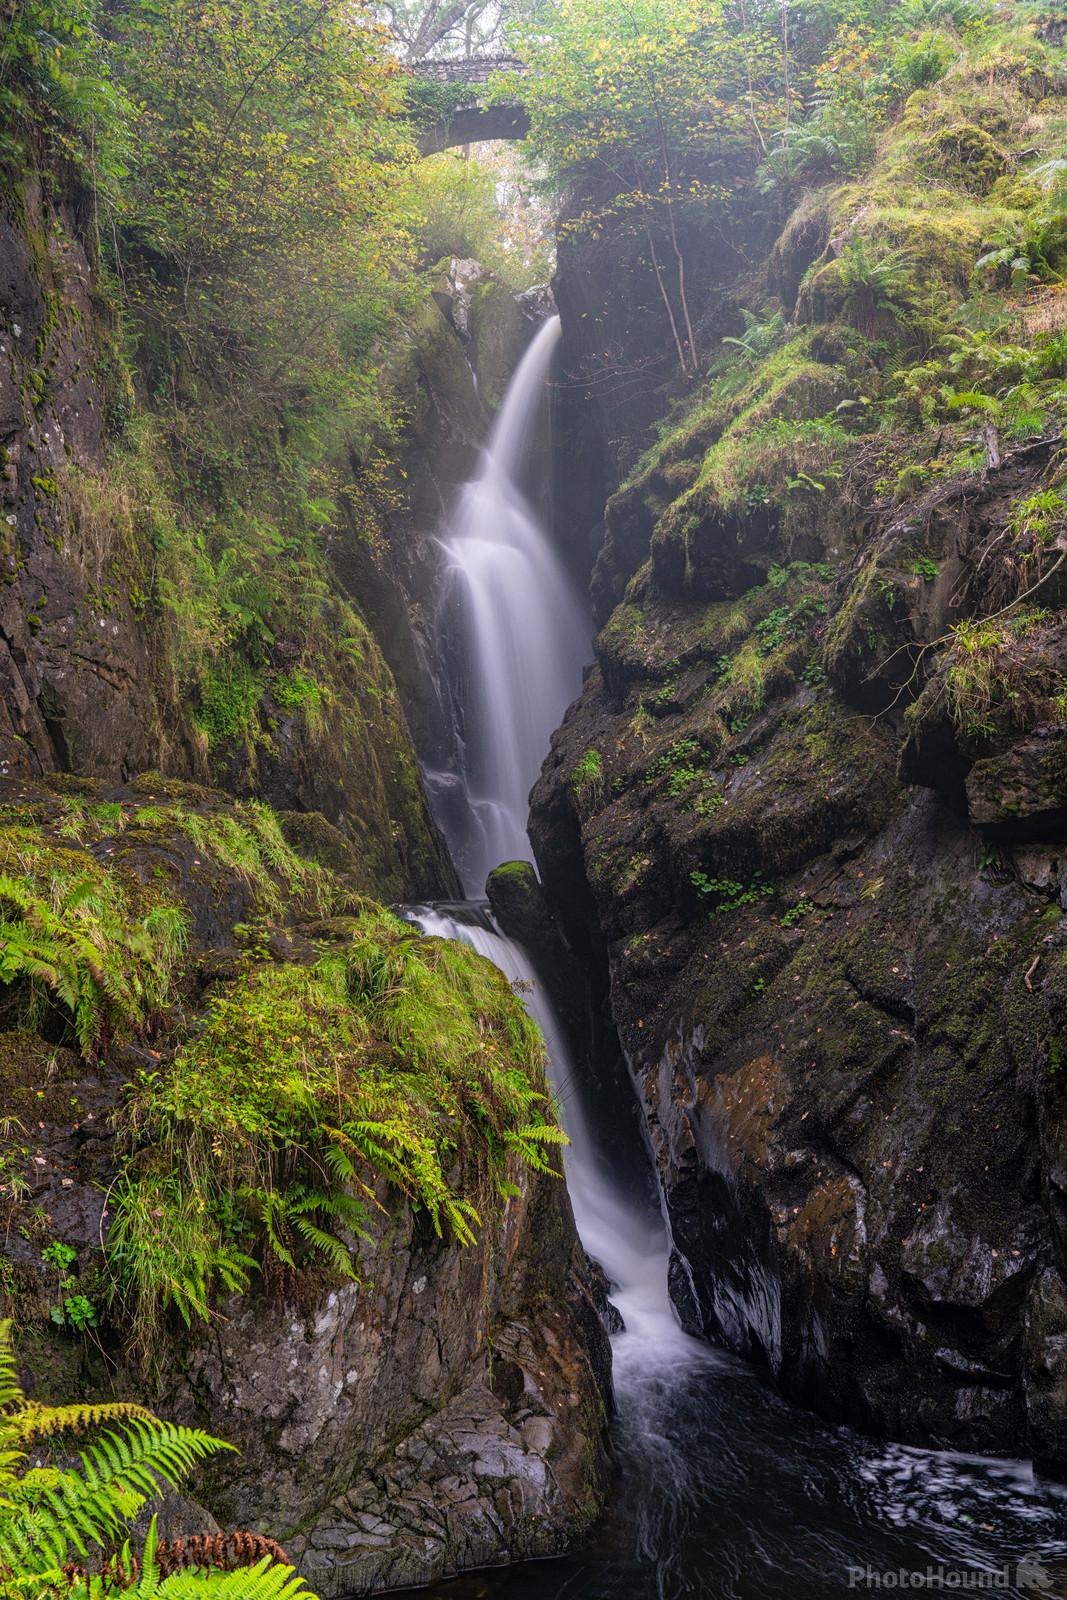 Image of Aira Force and High Forces, Lake District by Richard Lizzimore